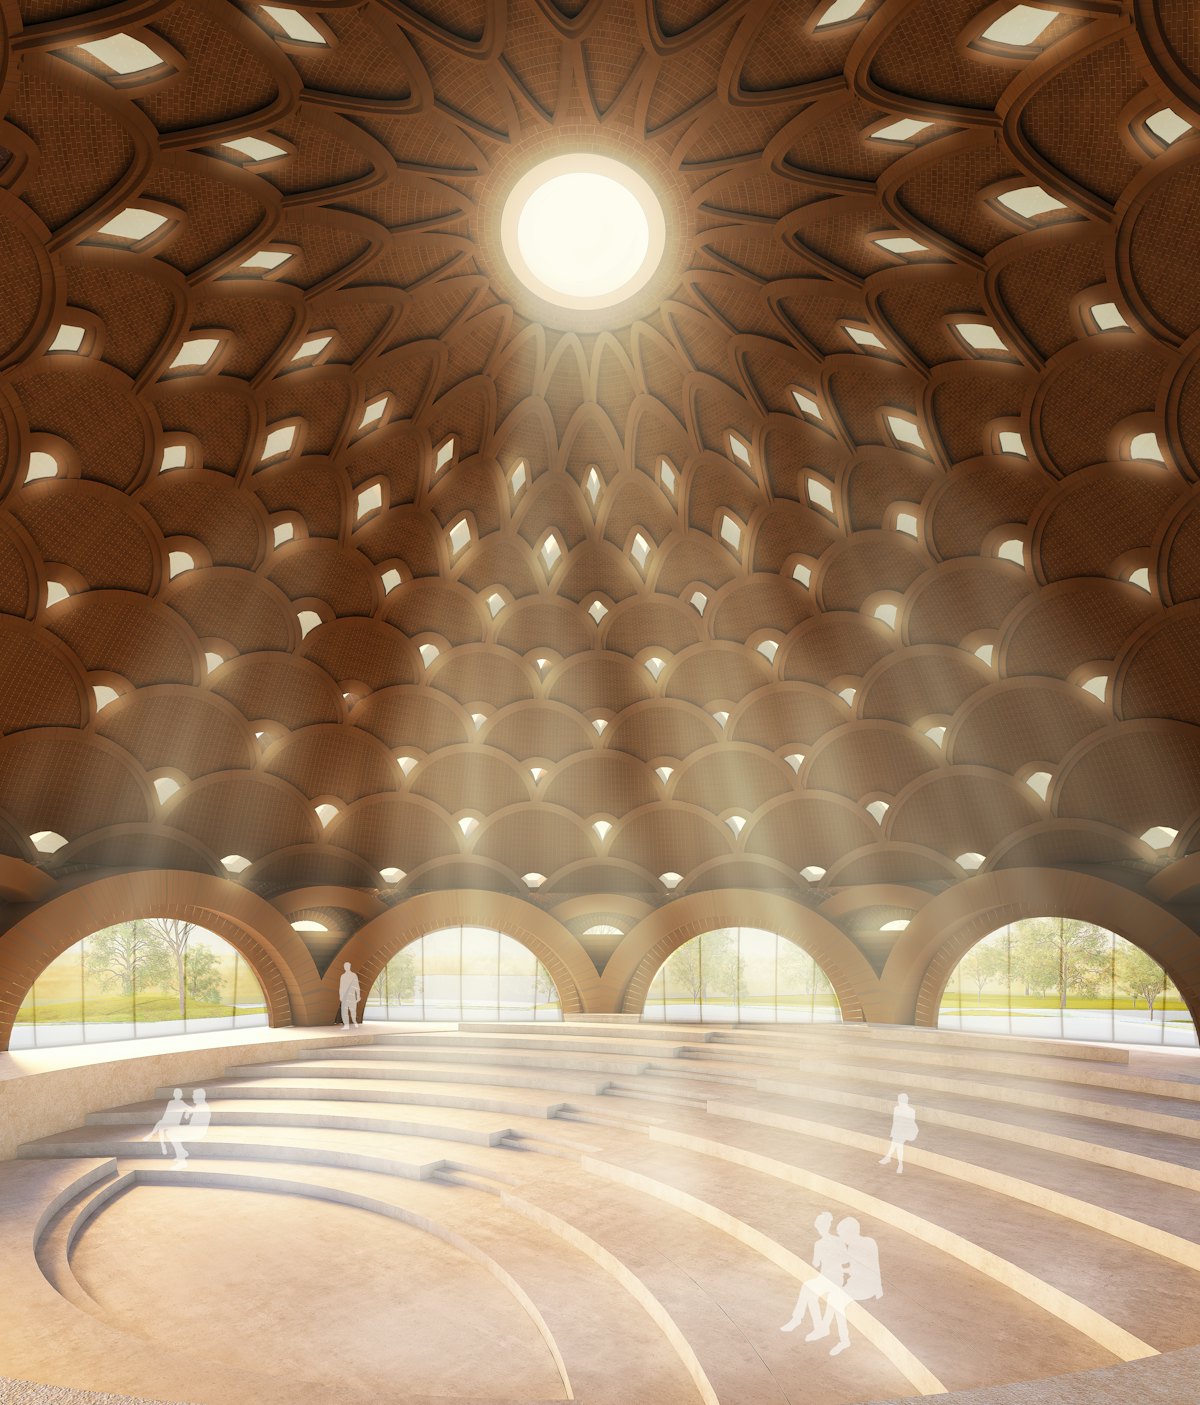 Openings at the center of the dome and in each ring of arches will reduce the weight of the ceiling while allowing gentle light to filter in.